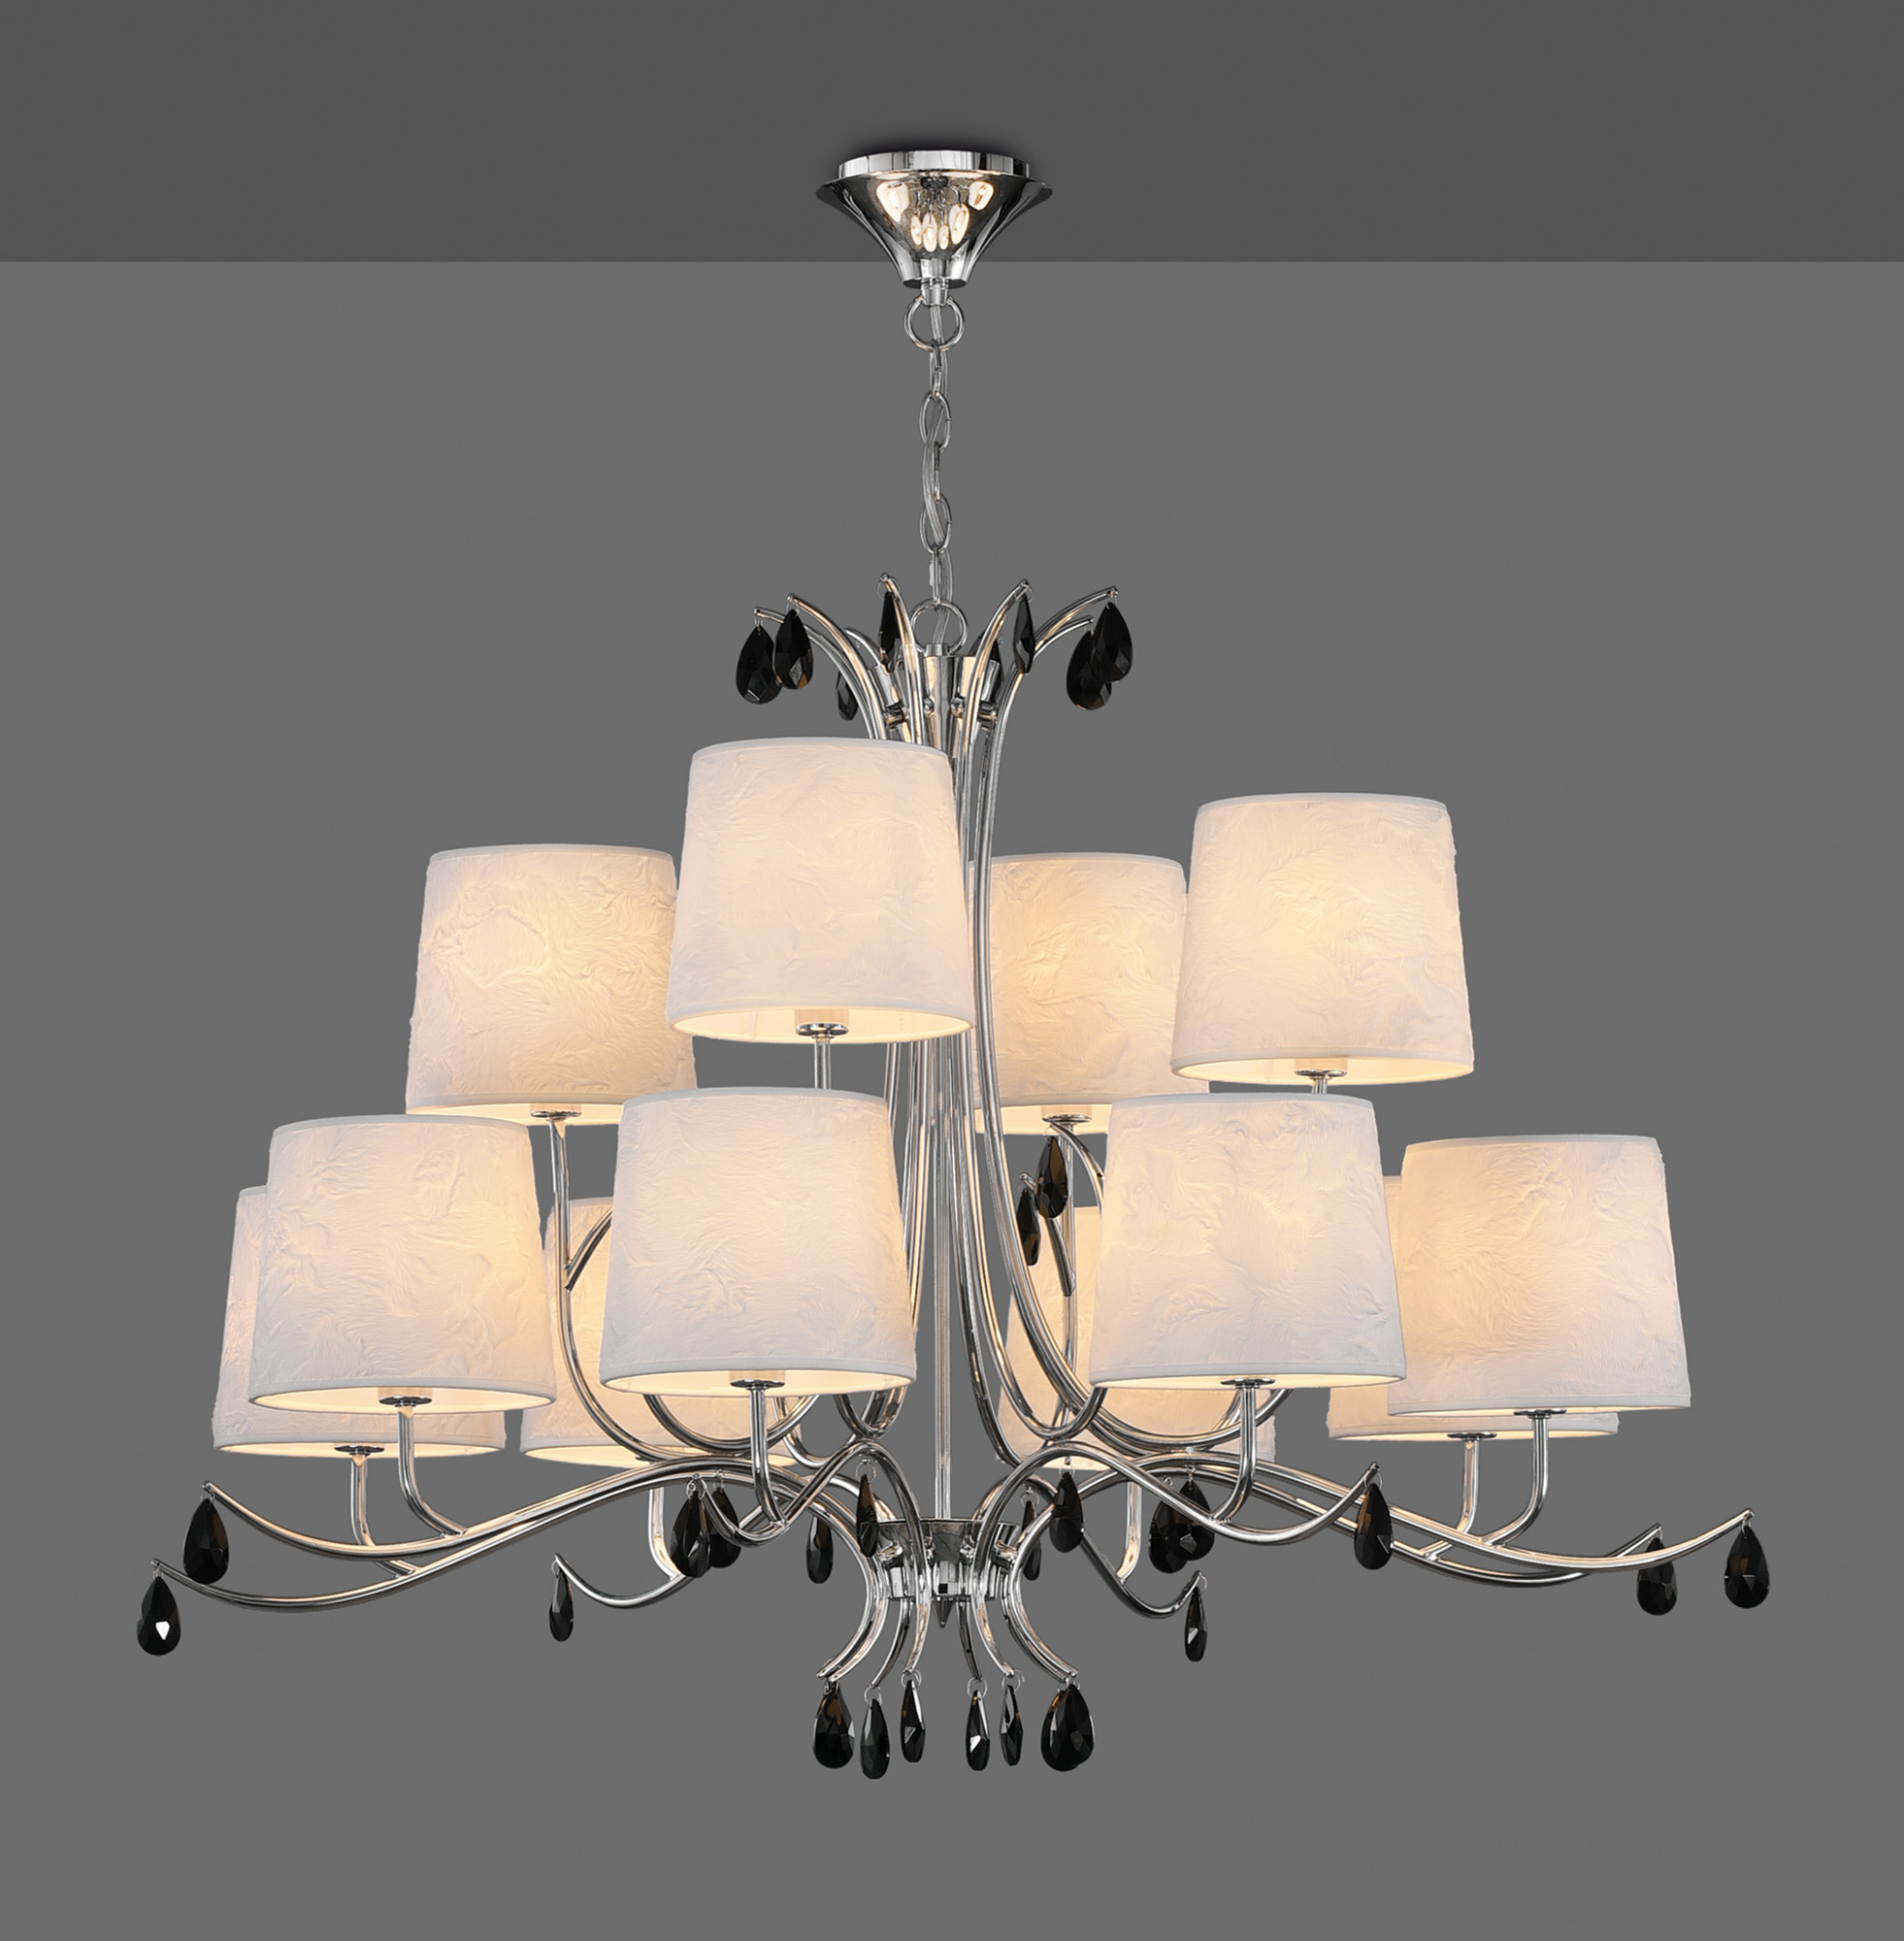 Andrea Polished Chrome Ceiling Lights Mantra Multi Arm Fittings